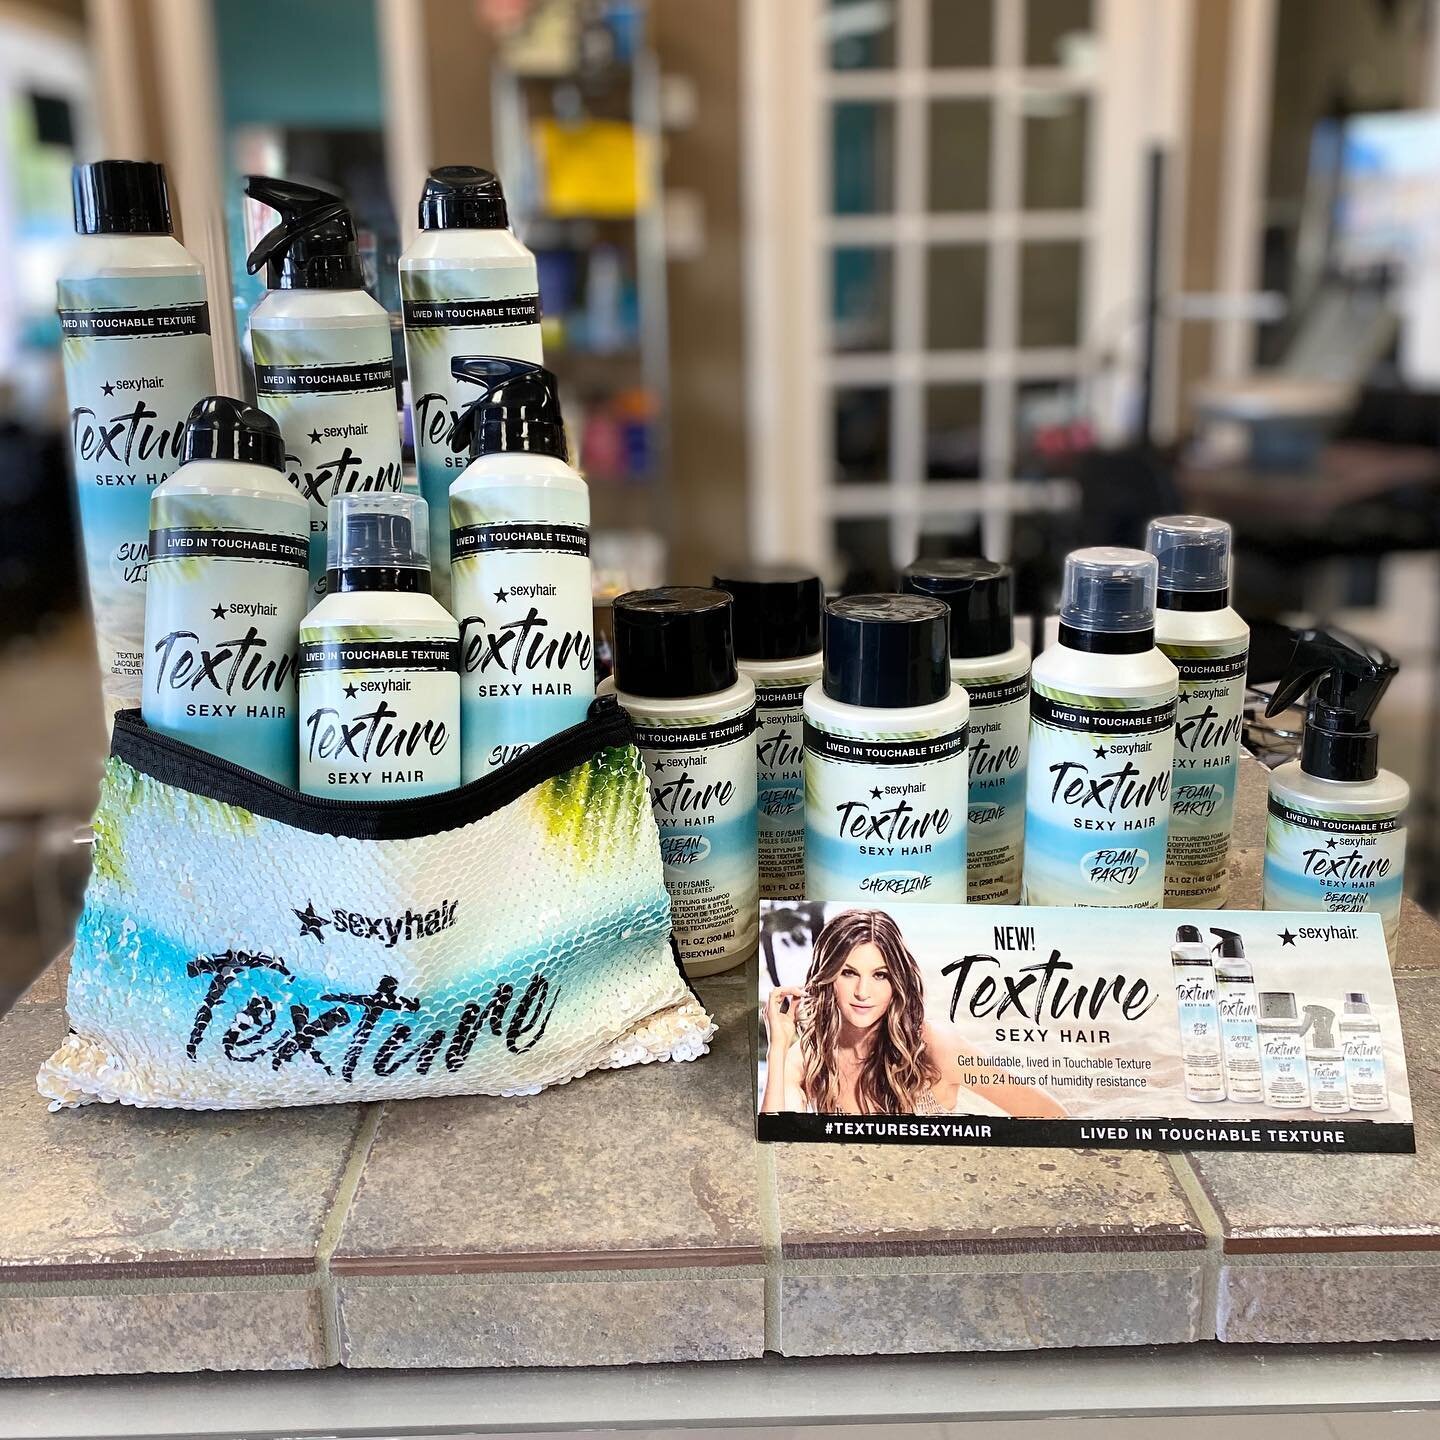 ✨AUGUST HIGHLIGHT PRODUCT✨
.
Keep that just hit the beach feeling all year long with the @sexyhair Texture Collection, on special for this month of August ONLY! 
.
Enjoy 20% off any Sexy Hair product or get $60 worth of product and receive a free Sex